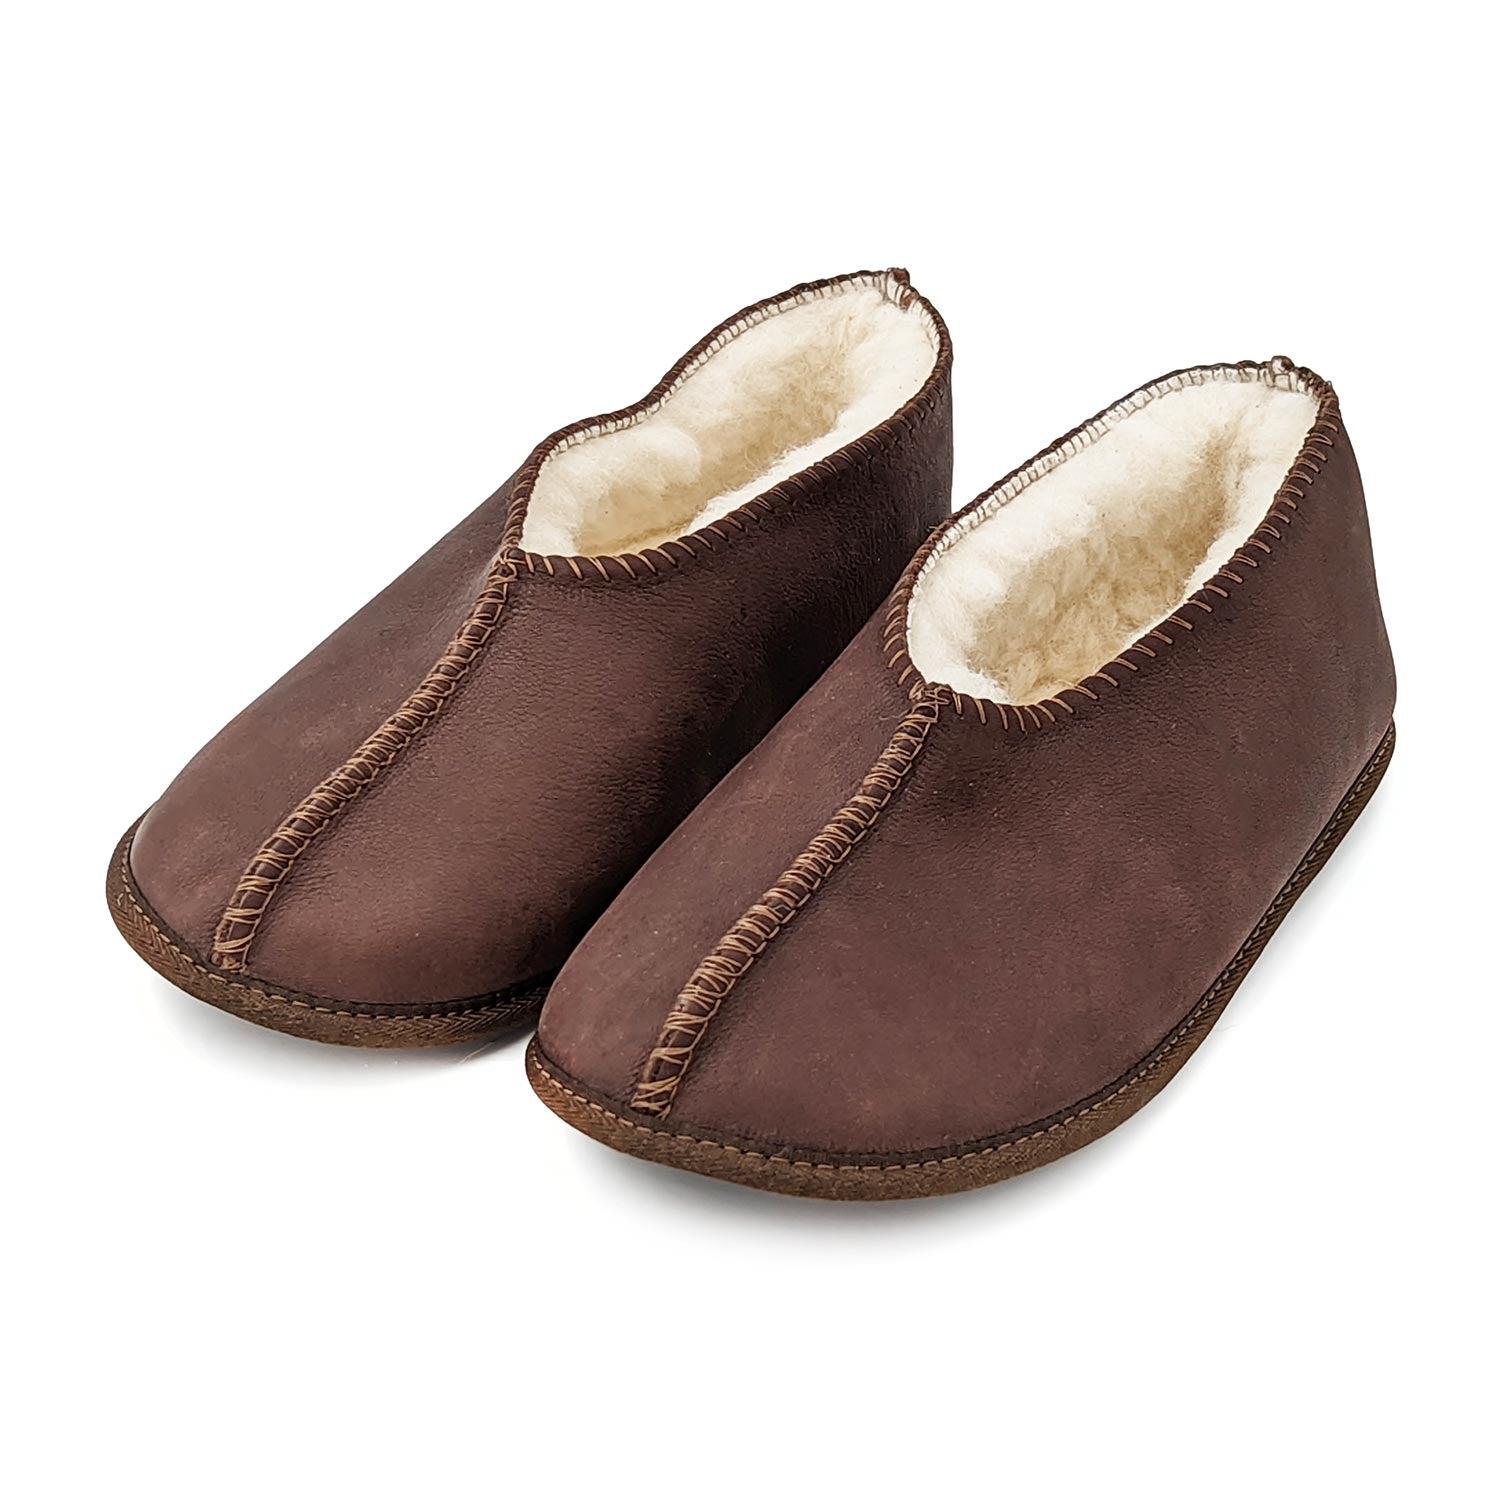 Karu Shloffy Leather Slippers - Choc Brown Soft-Sole | Made by Artisans